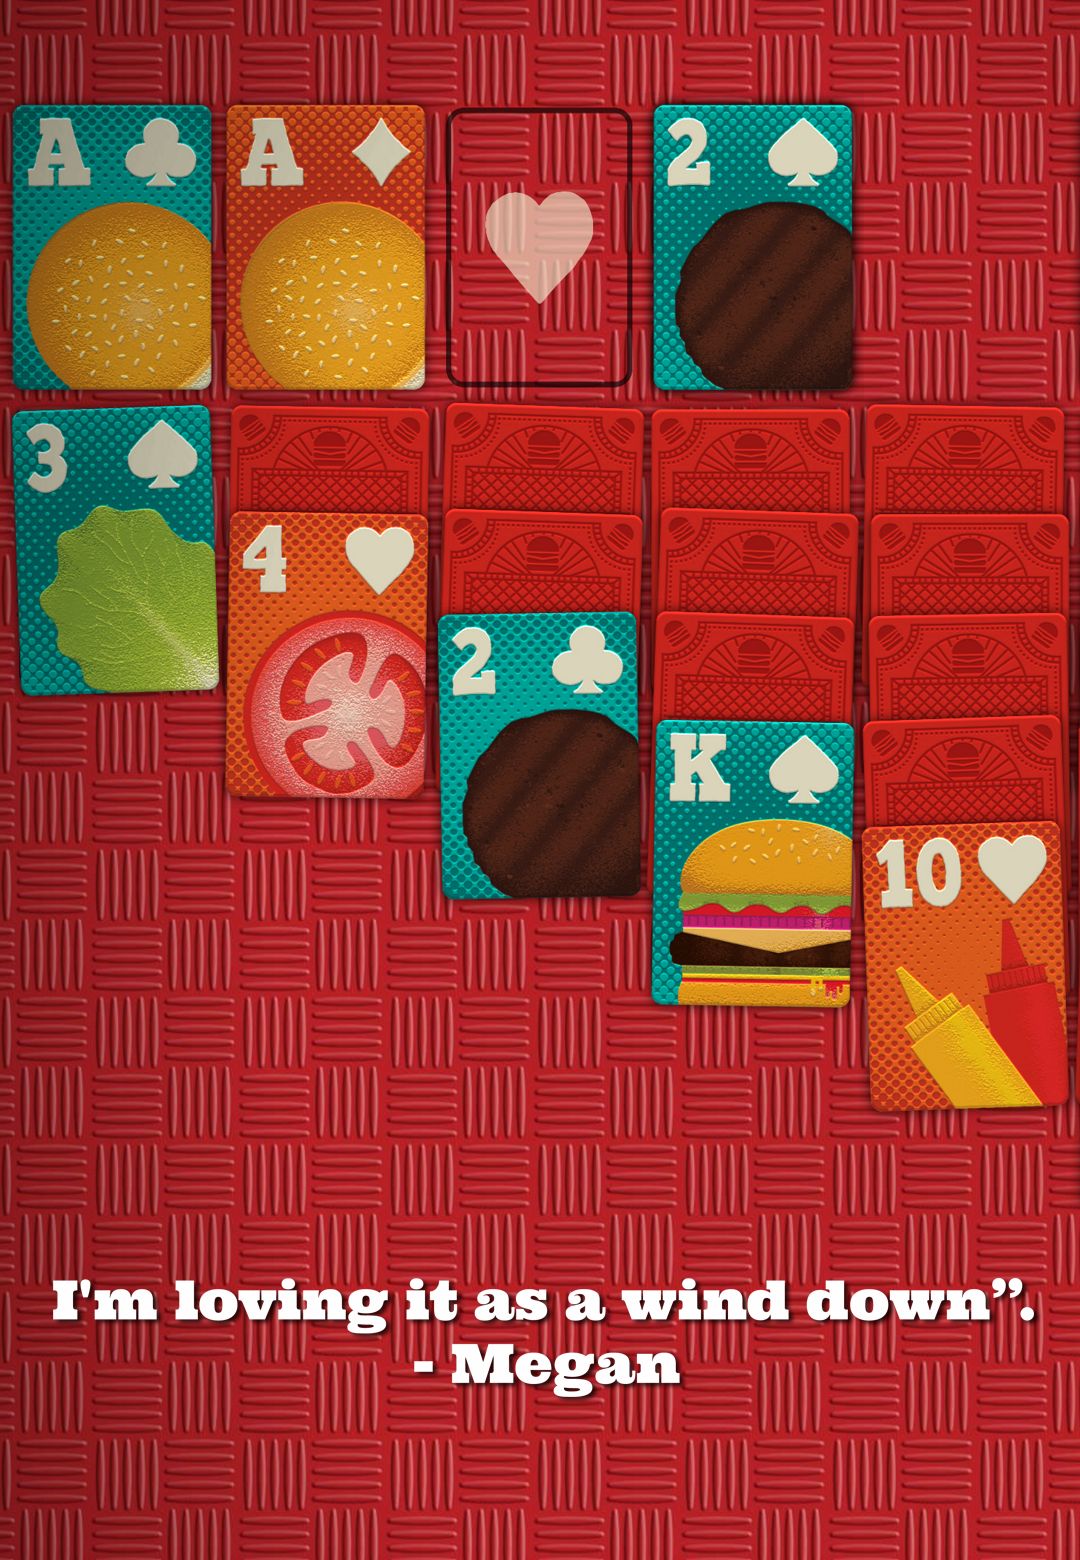 FLICK SOLITAIRE - Card Games for Android